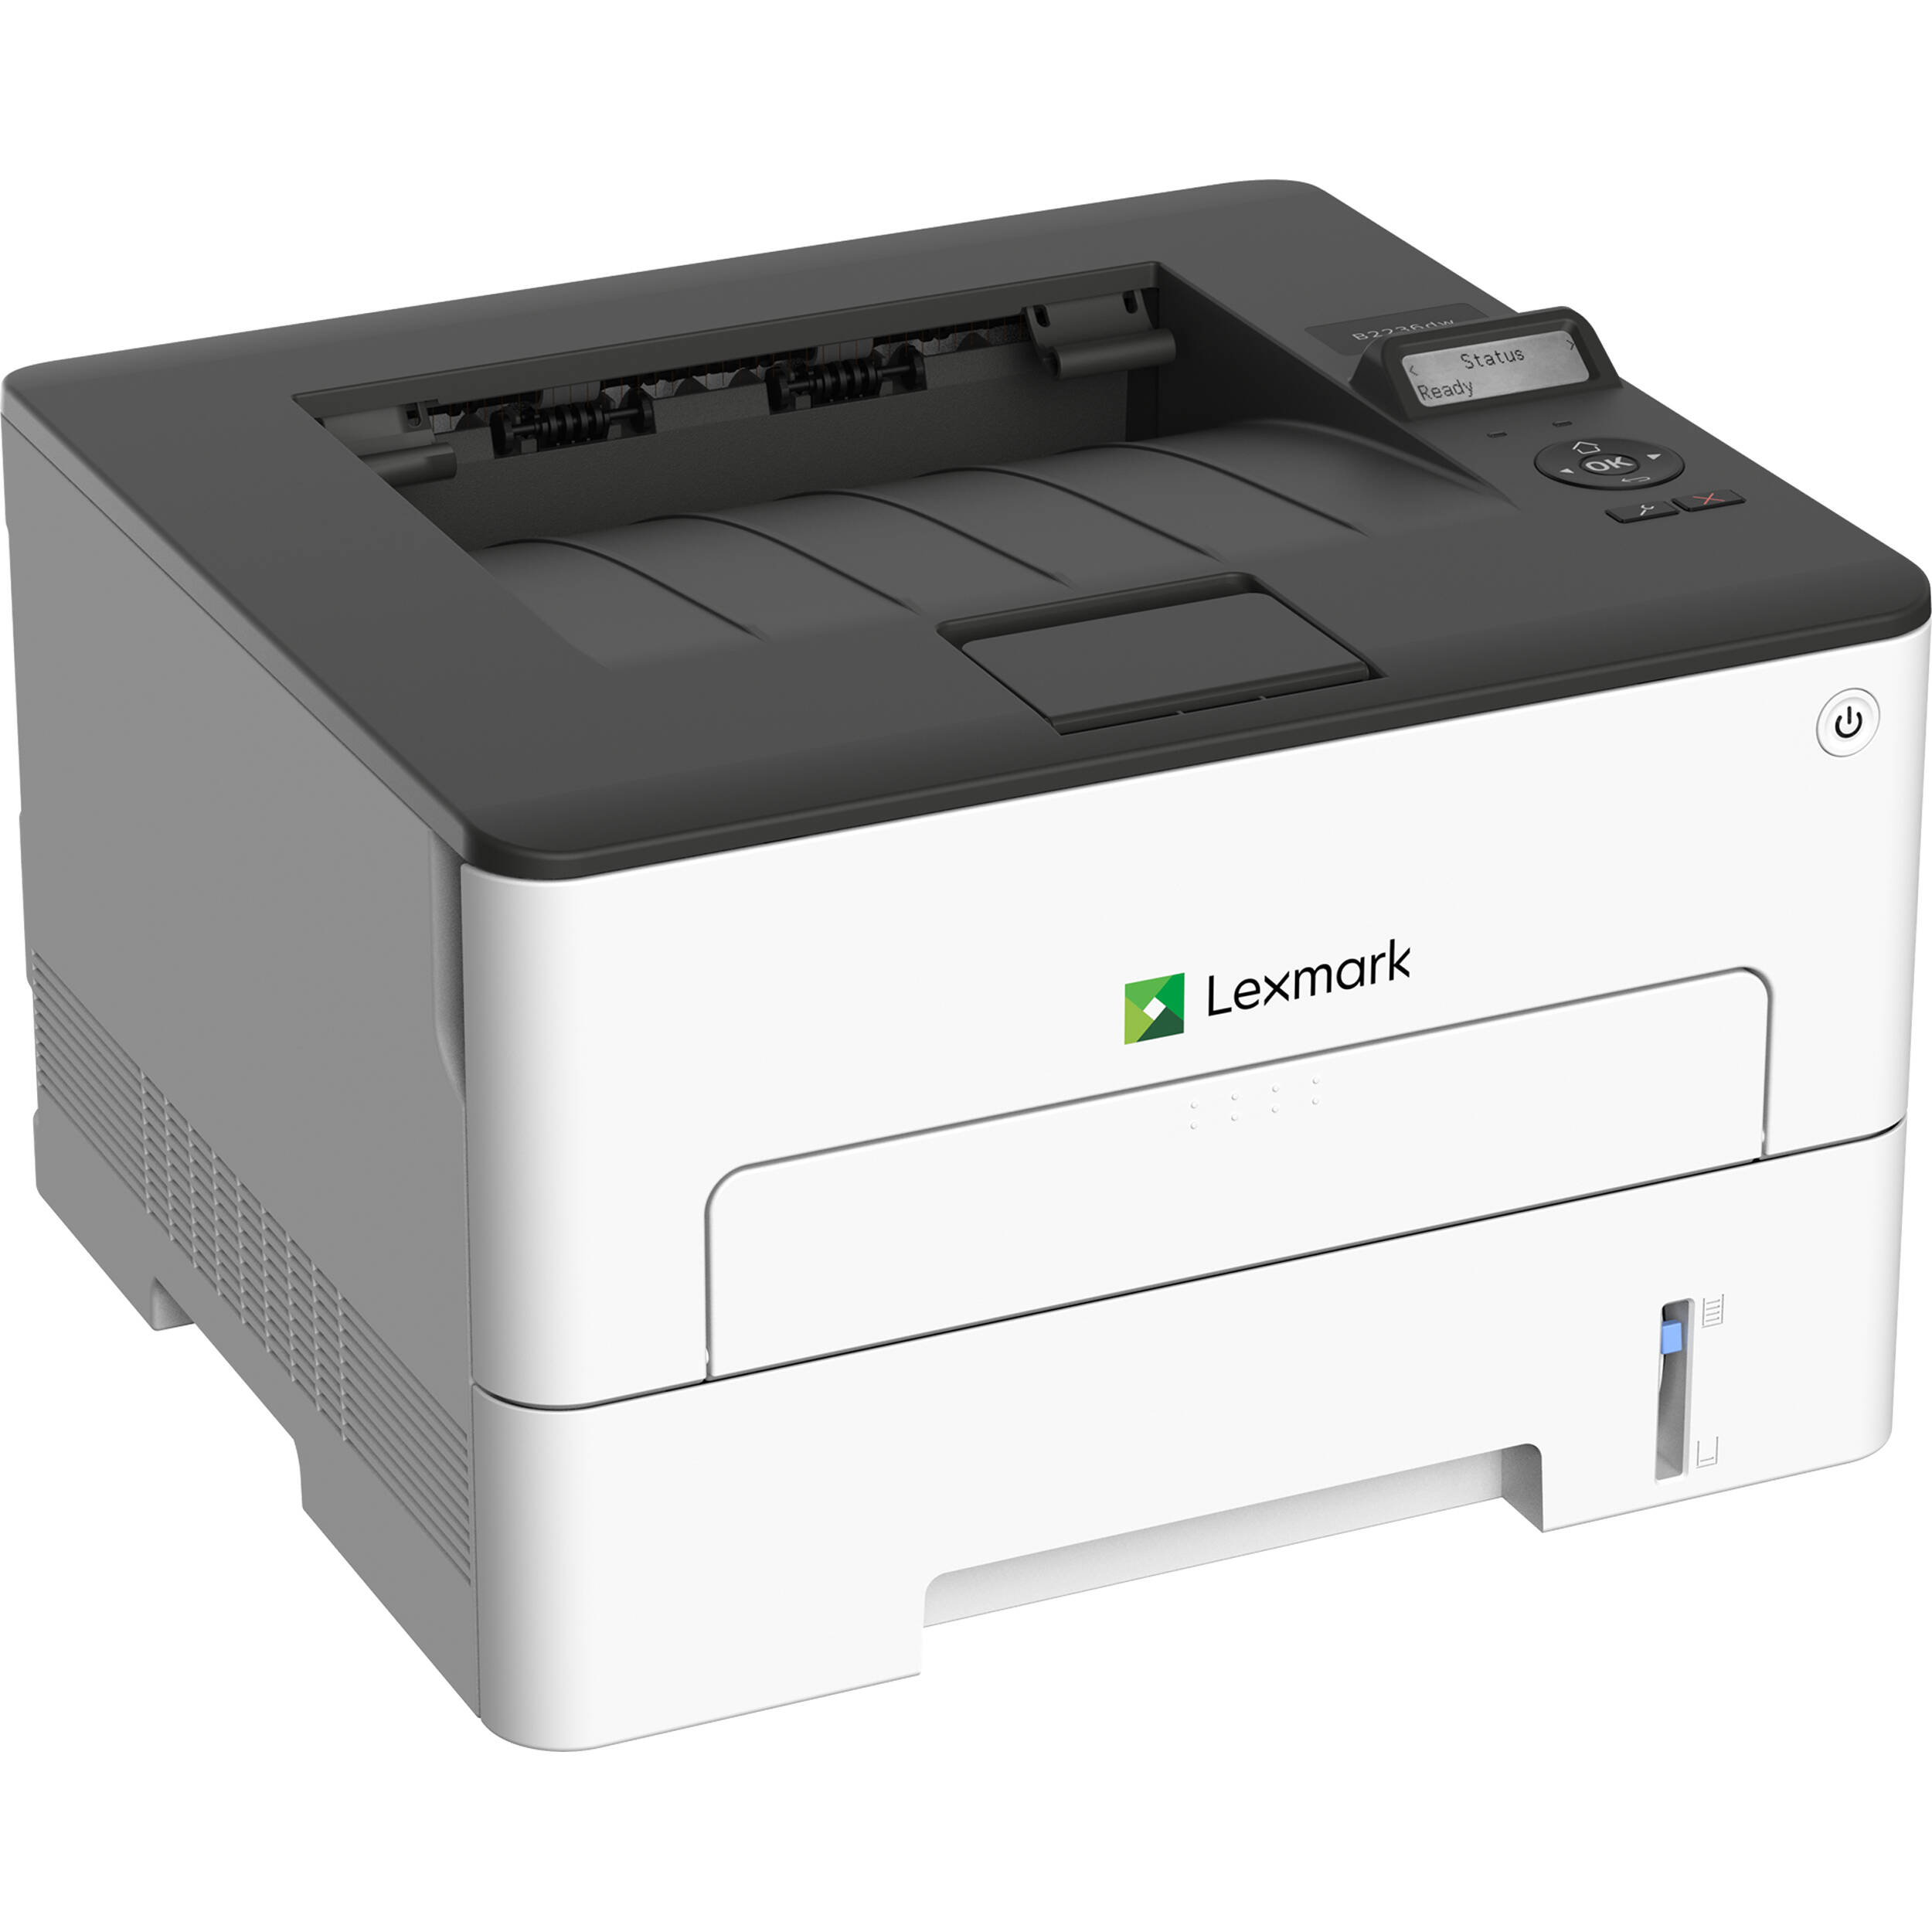 How To Connect Lexmark Printer To Phone